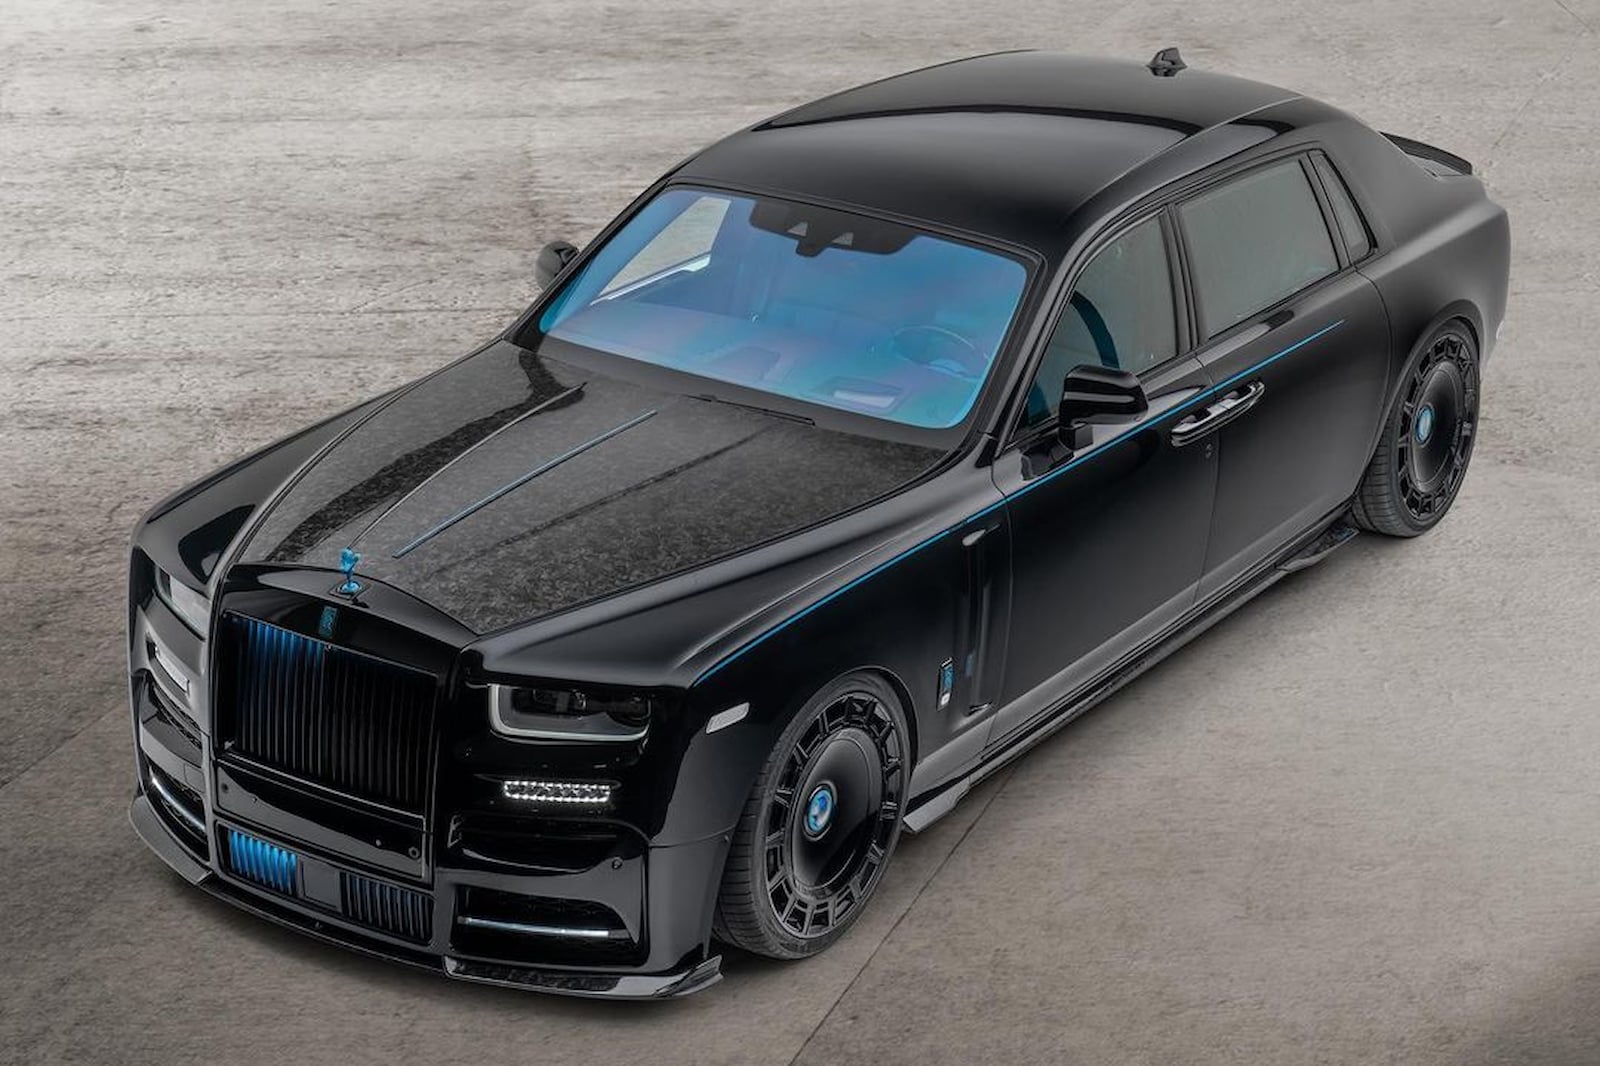 Ever thought the Rolls-Royce Phantom was a bit… subtle?